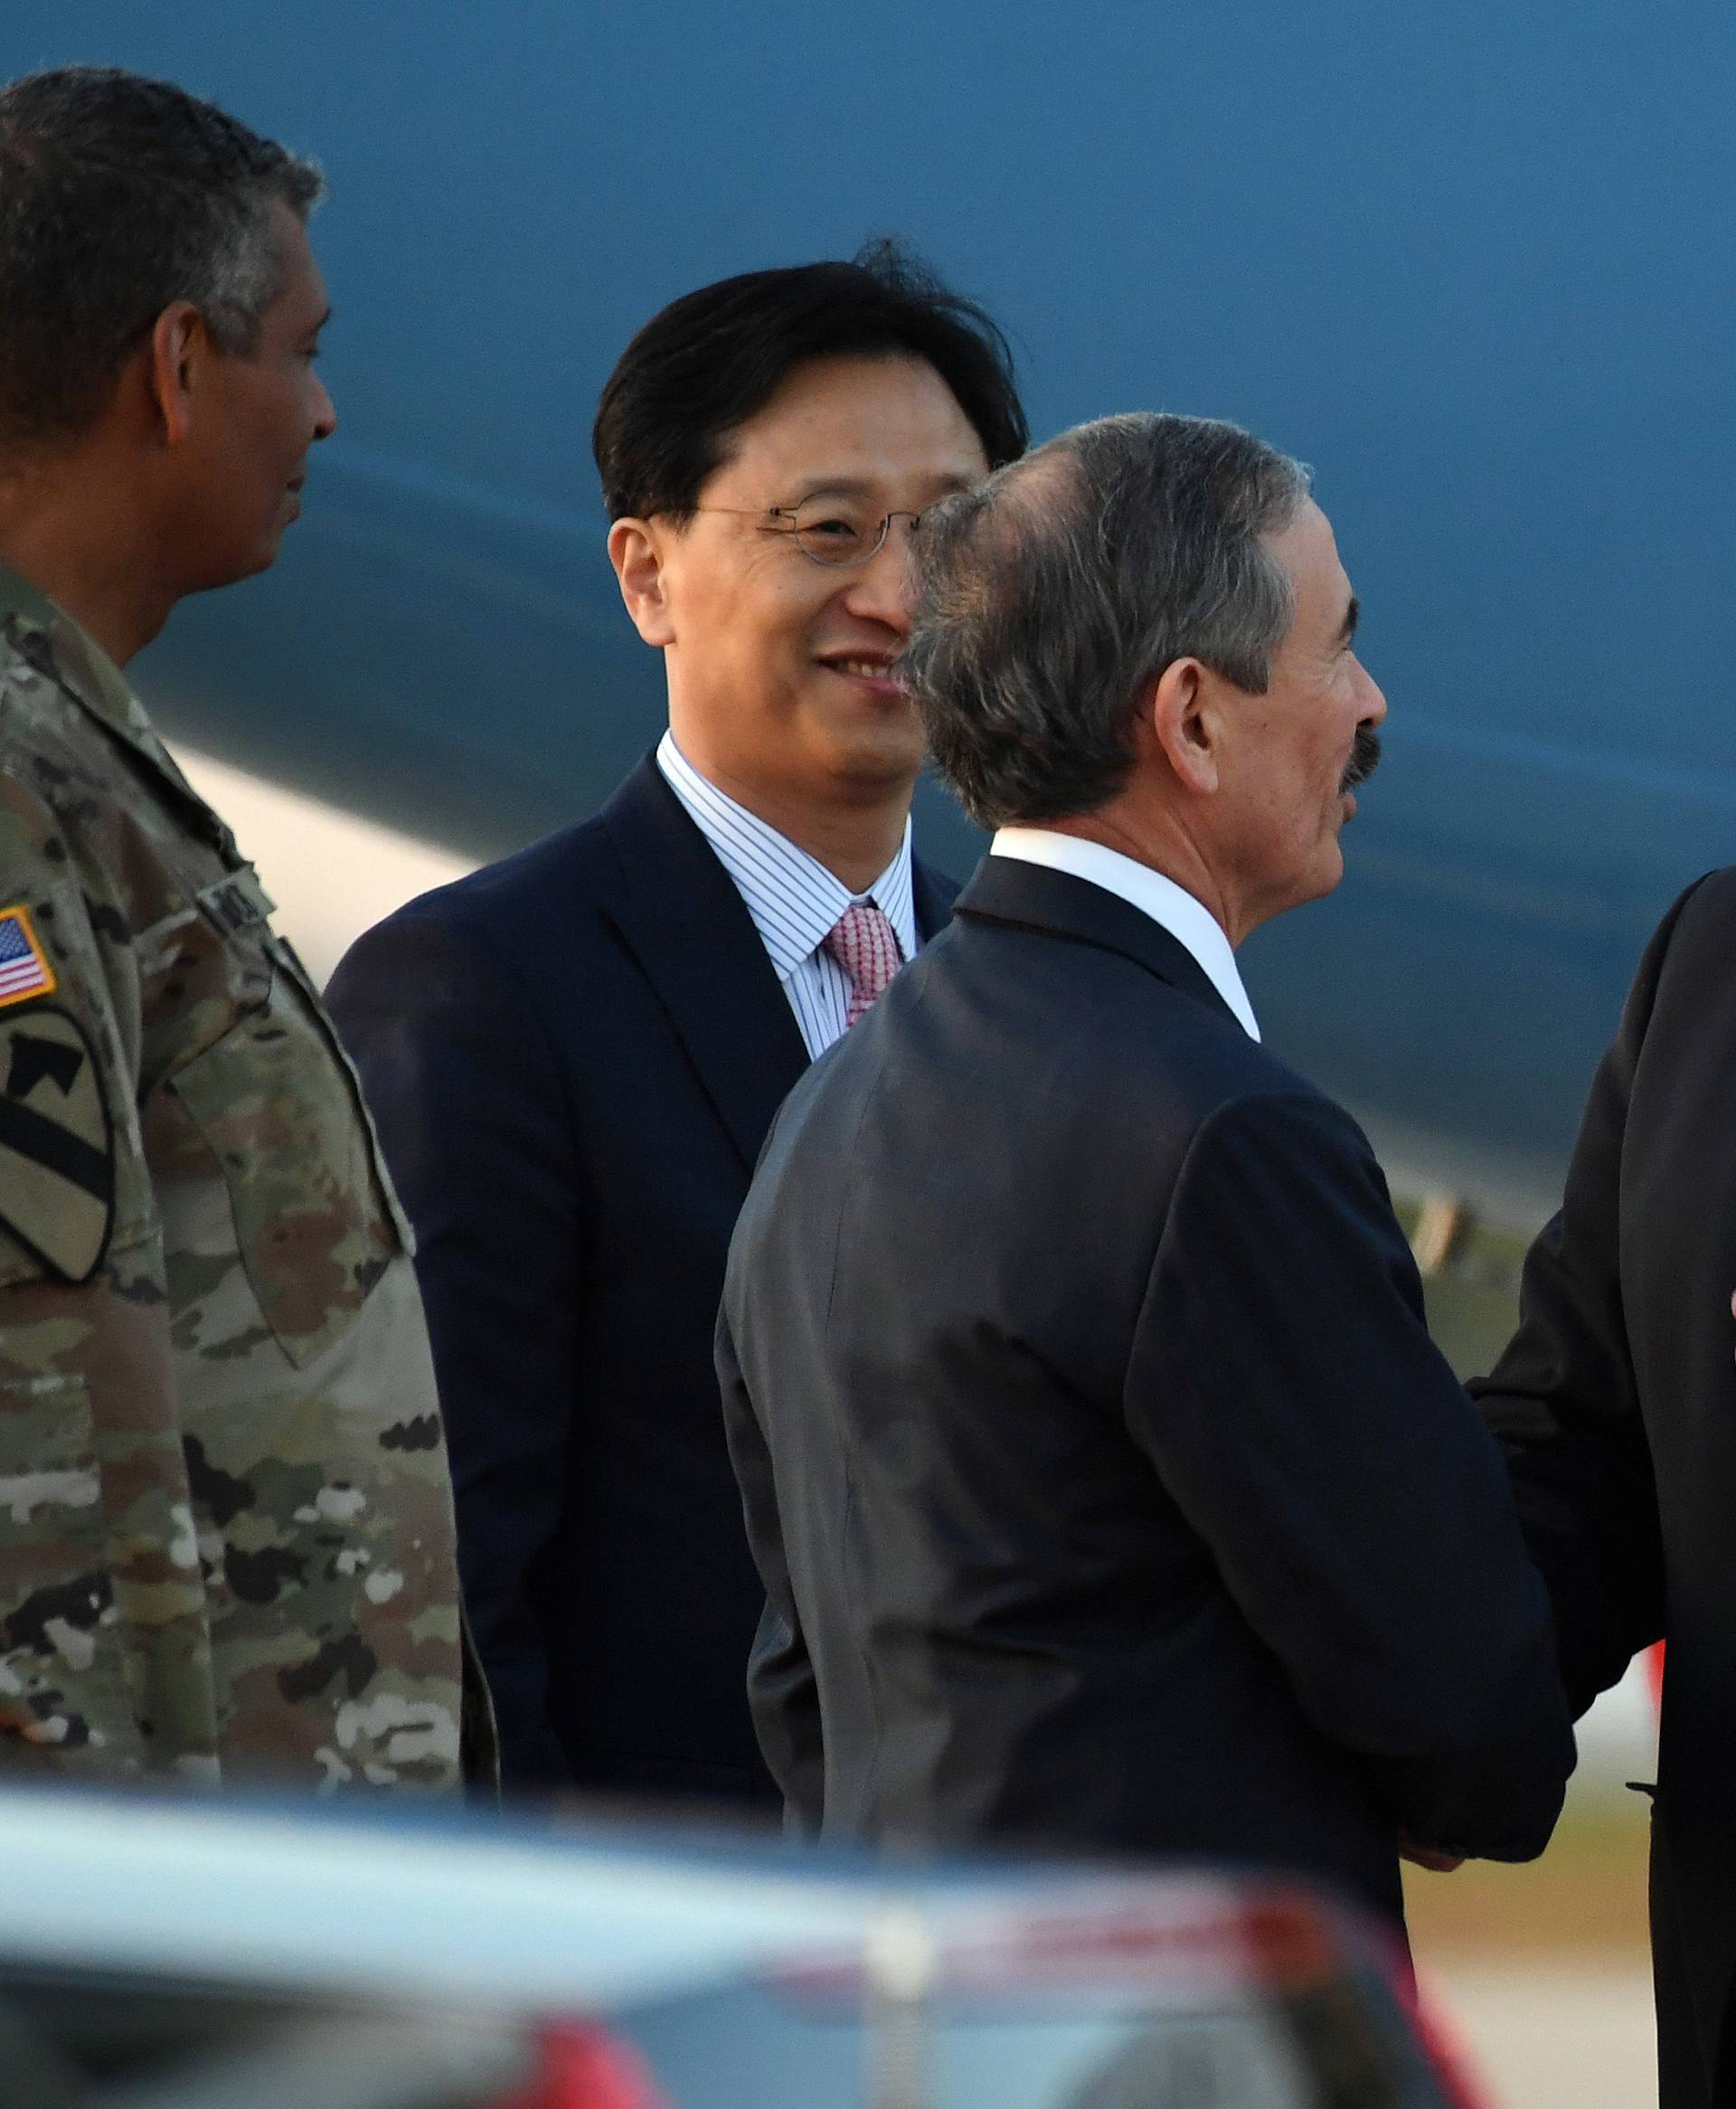 U.S. Secretary of State Mike Pompeo is greeted by U.S. Ambassador to South Korea Harry Harris upon his arrival at Osan Air Base in Pyeongtaek